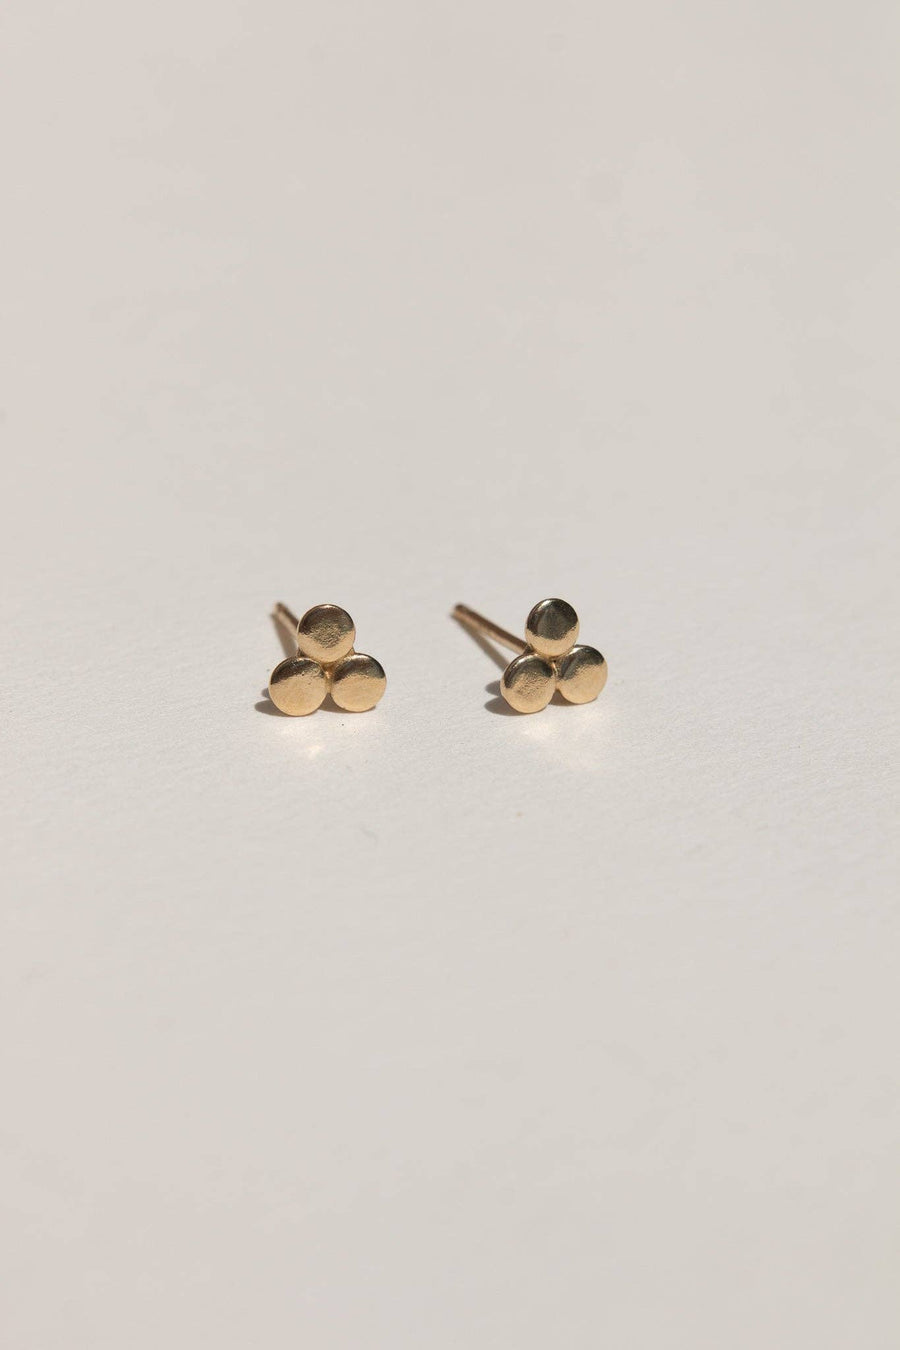 fair trade ‘Luwa’ Studs (meaning ‘Flower’ in Tumbuka) are the perfect go-to delicate studs for everyday wear.